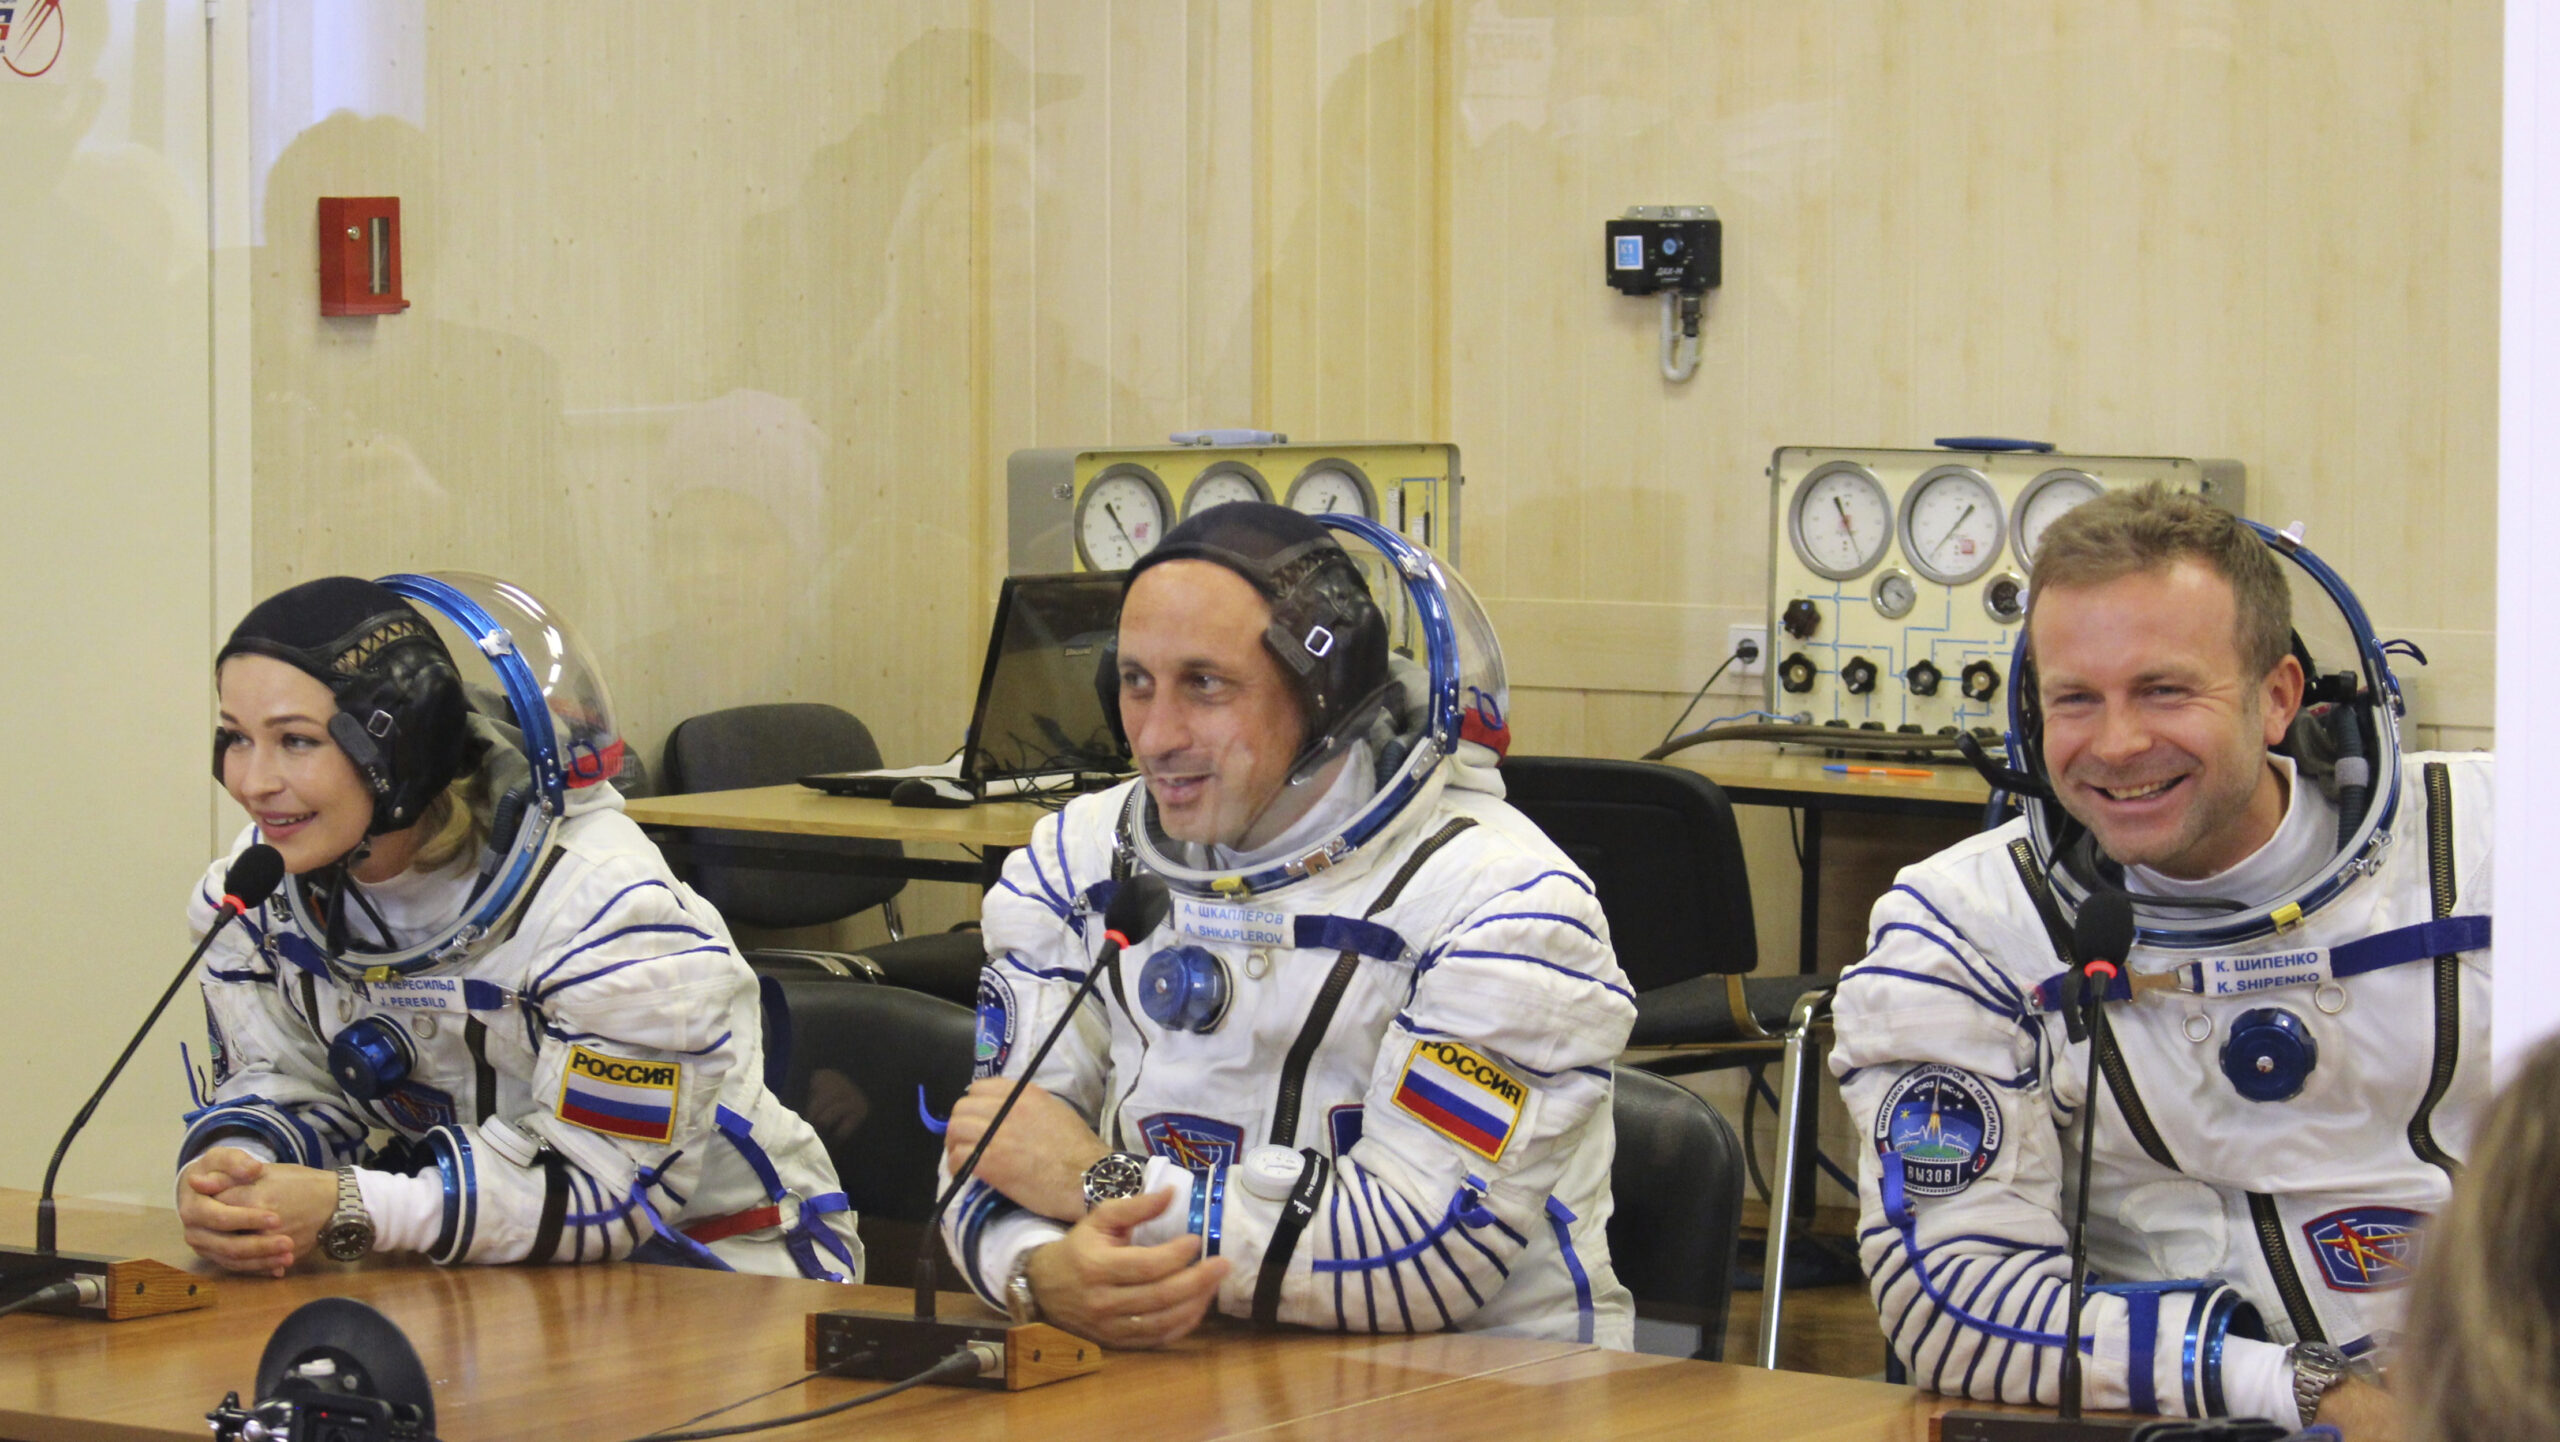 In this handout photo released by Roscosmos, actress Yulia Peresild, left, film director Klim Shipenko, right, and cosmonaut Anton Shkaplerov speak with their relatives through a safety glass prior the launch at the Baikonur Cosmodrome, Kazakhstan, Tuesday, Oct. 5, 2021. Actress Yulia Peresild and film director Klim Shipenko blasted off Tuesday for the International Space Station in a Russian Soyuz spacecraft together with cosmonaut Anton Shkaplerov, a veteran of three space missions, to make a feature film in orbit. (Roscosmos Space Agency via AP)